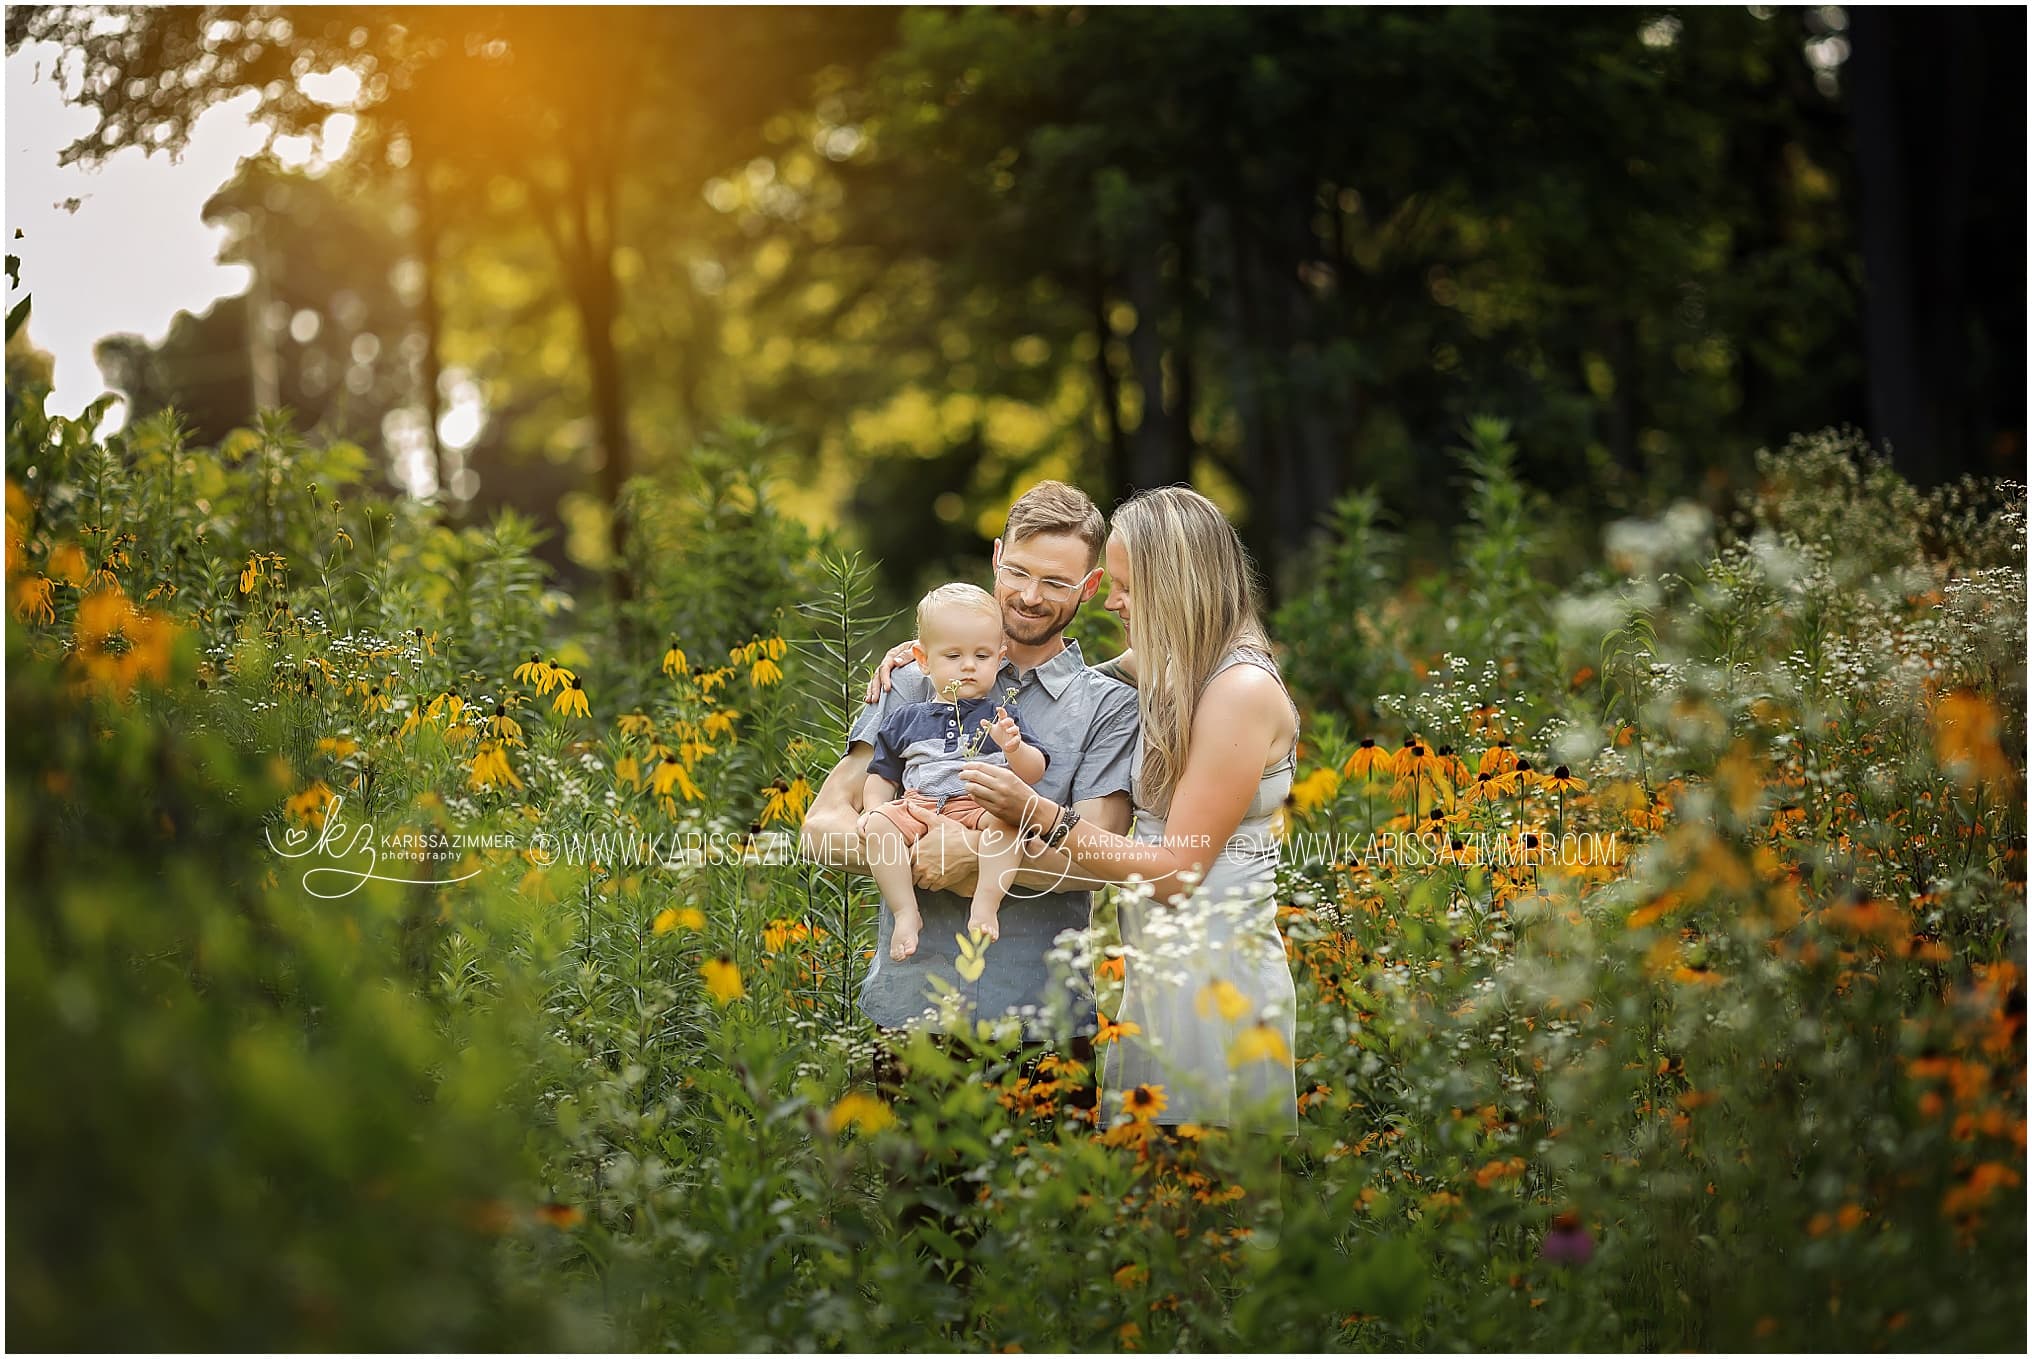 Outdoor family photography in flower field near Carlisle PA